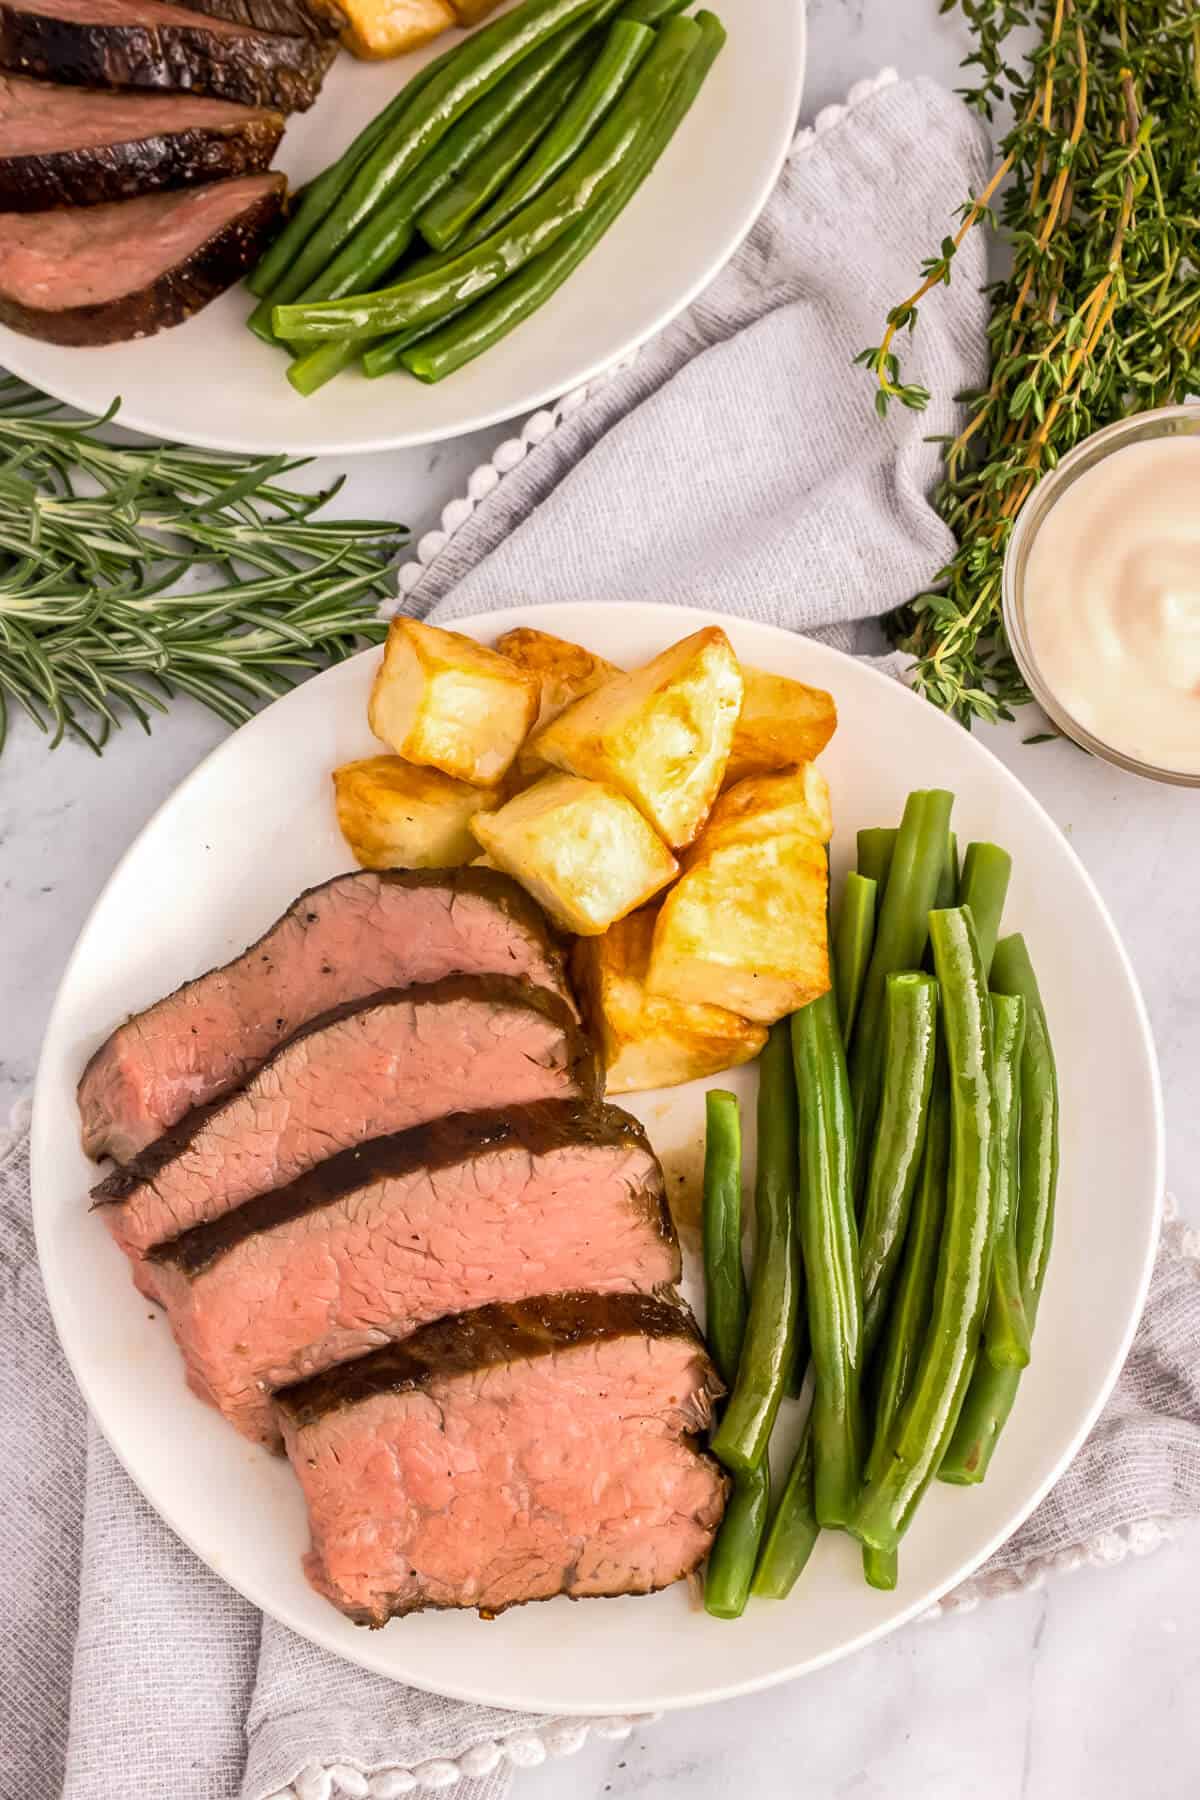 Sliced tri-tip roast on a plate with green beans and diced potatoes.